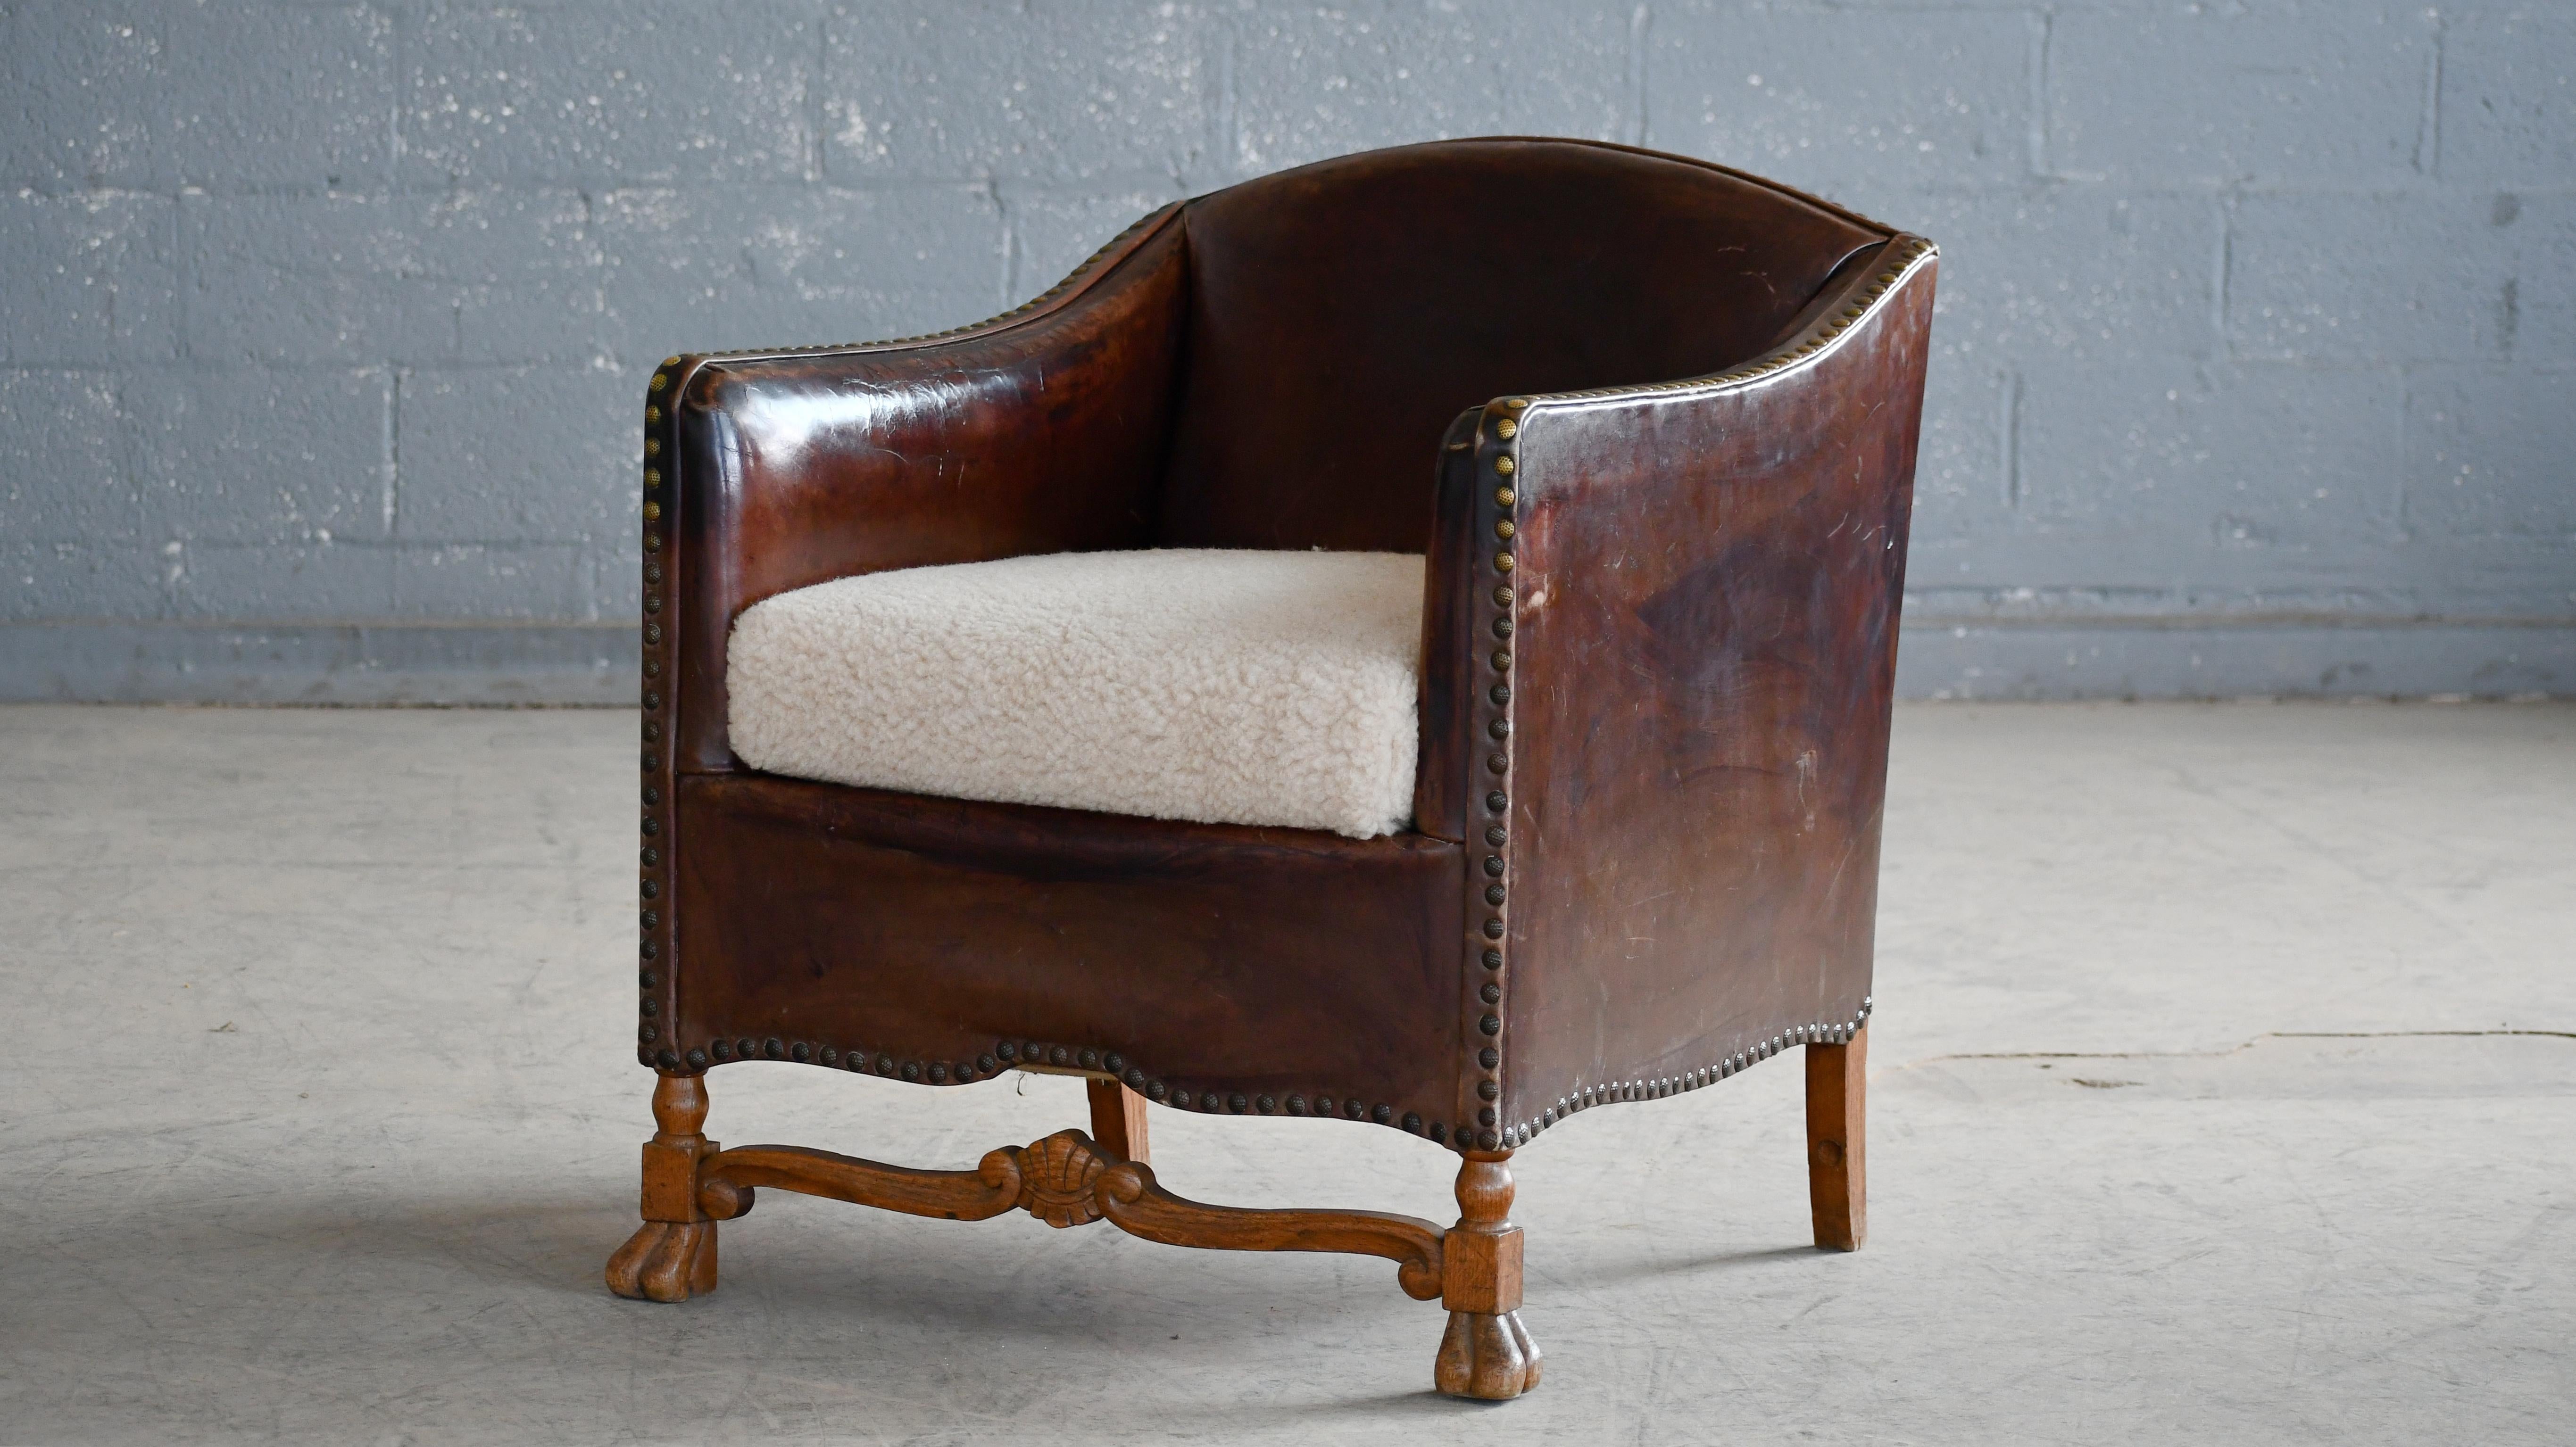 Charming small scale Danish club chairs made around the 1930's to 1940's. The Danes called these smaller type chairs for 